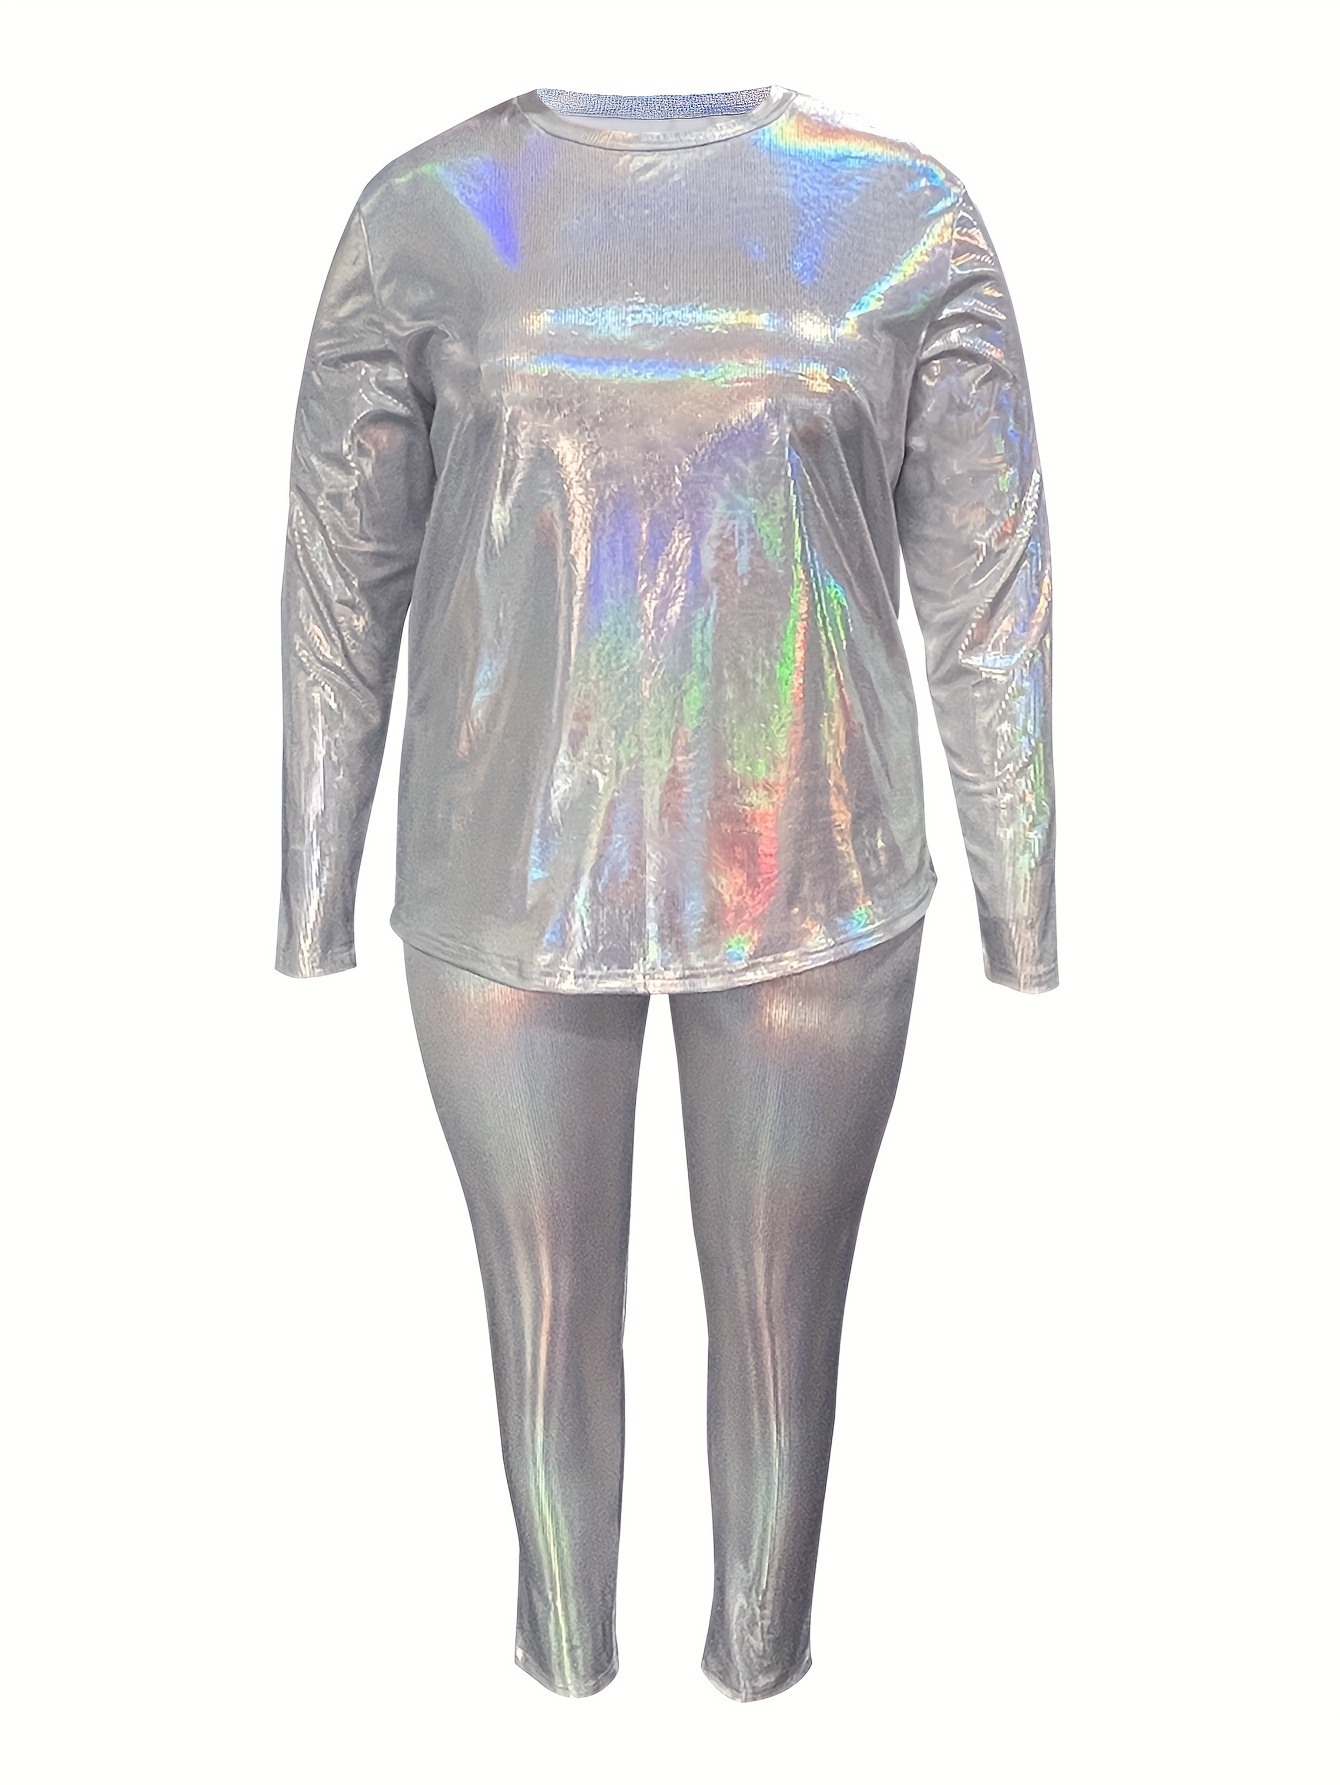 How to Wear Metallic Pieces  Outfits with leggings, Silver leggings outfit,  Silver leggings